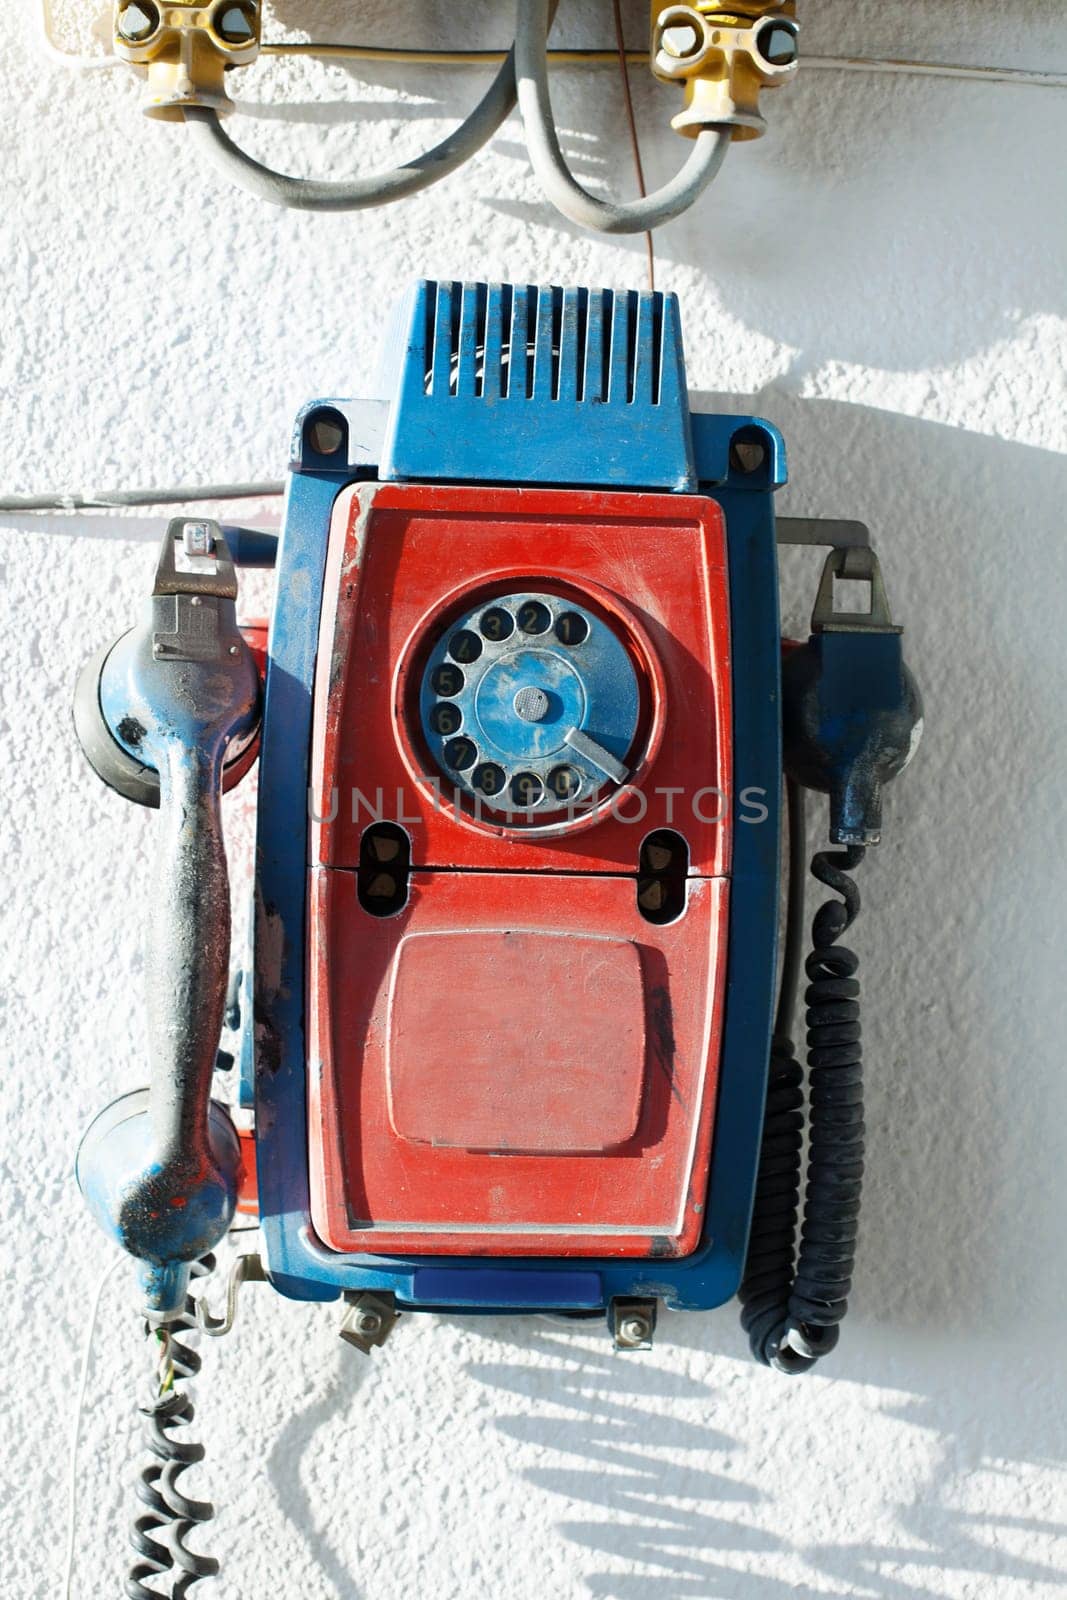 Old rotary phone on wall, close-up